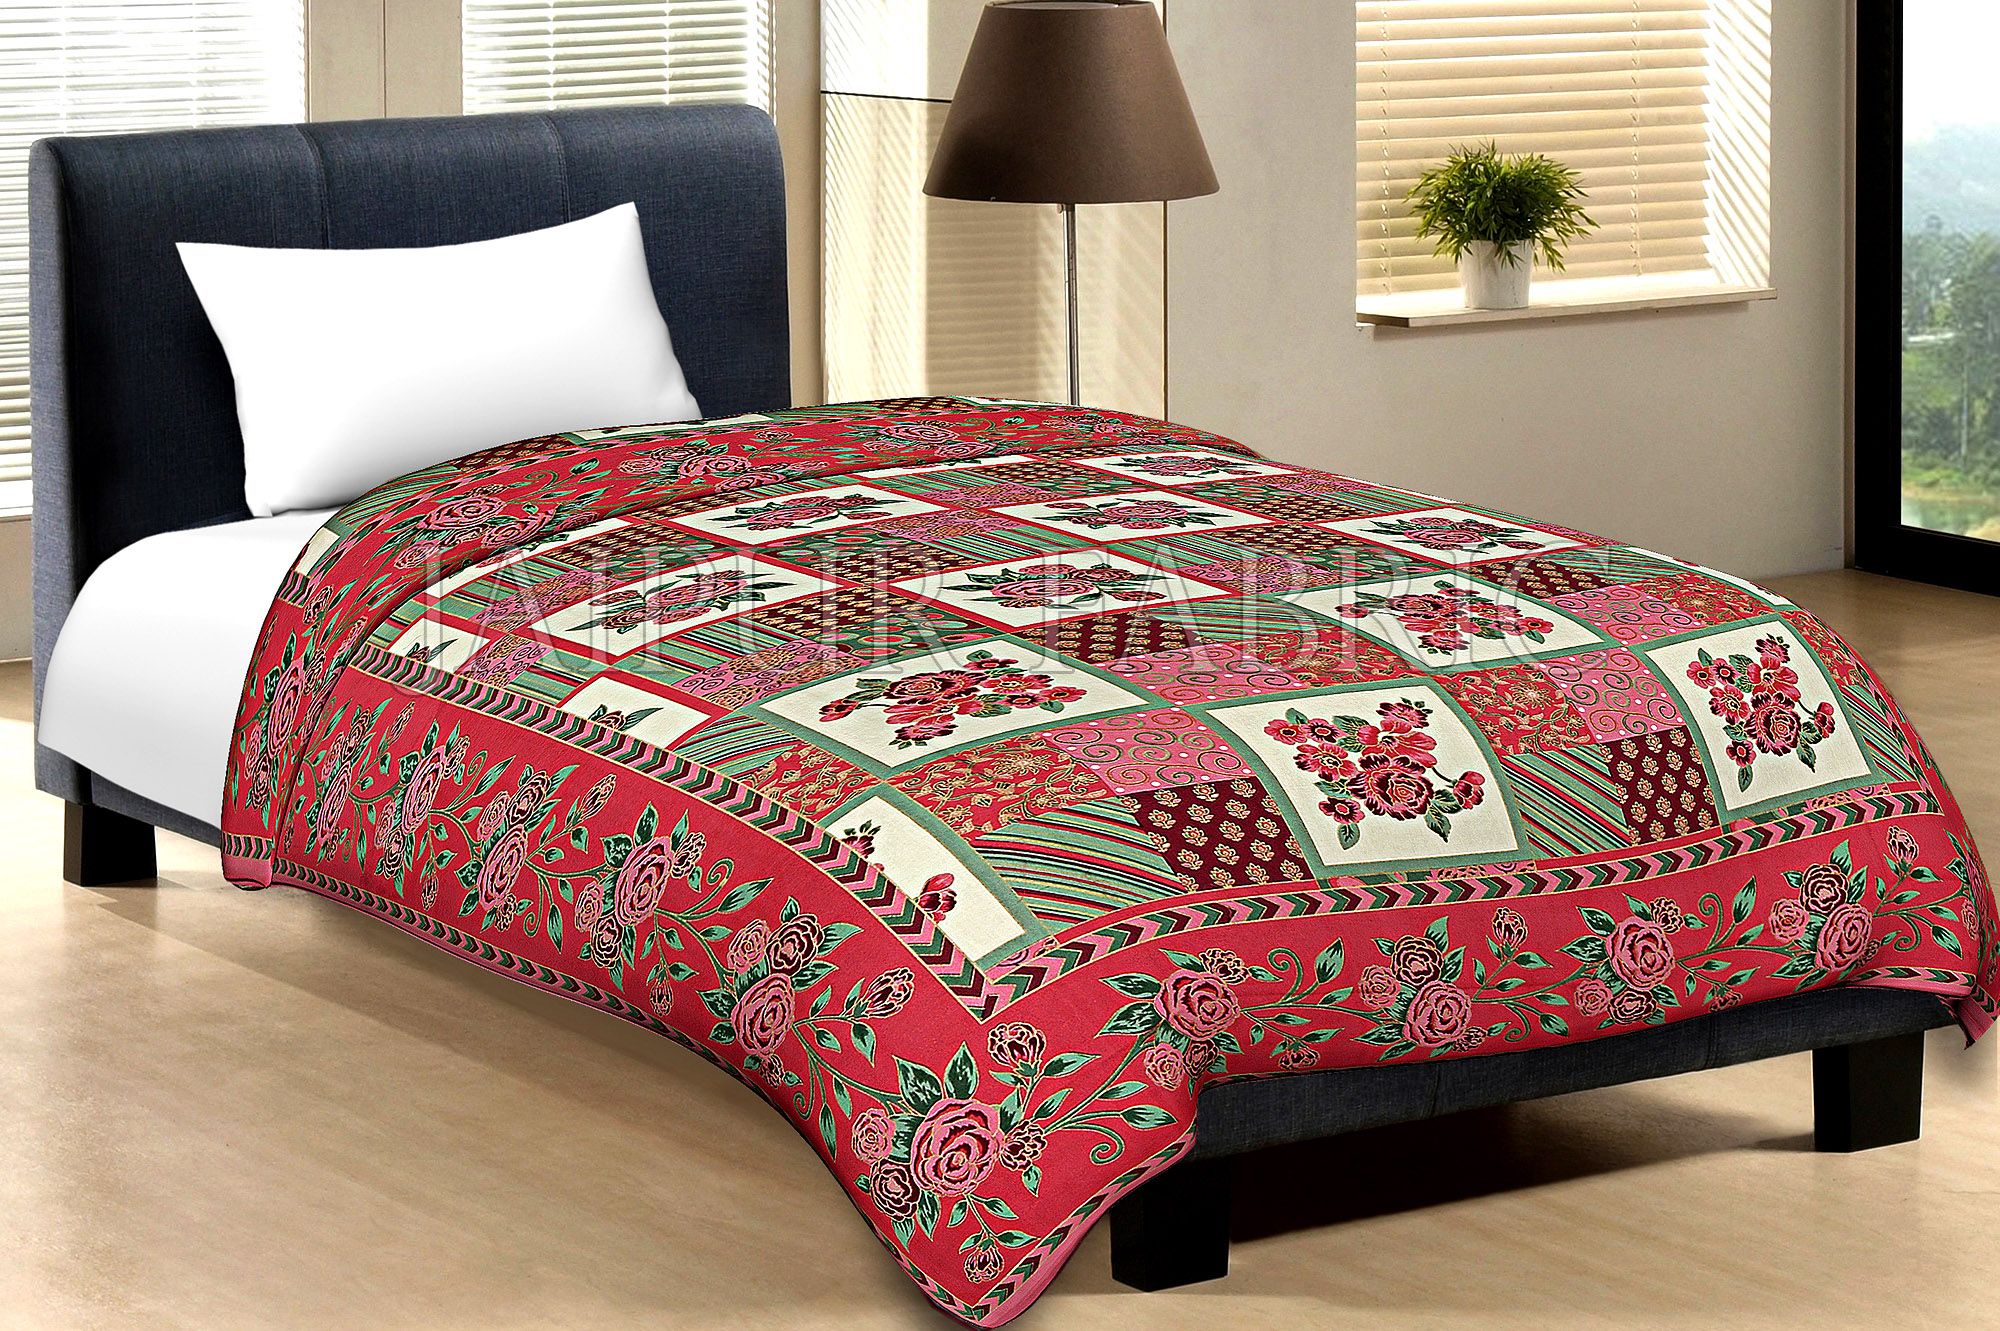 Red Border Cream Base Flower And Check With Golden Shining Print Cotton Single Bed Sheet With Out Pillow Cover